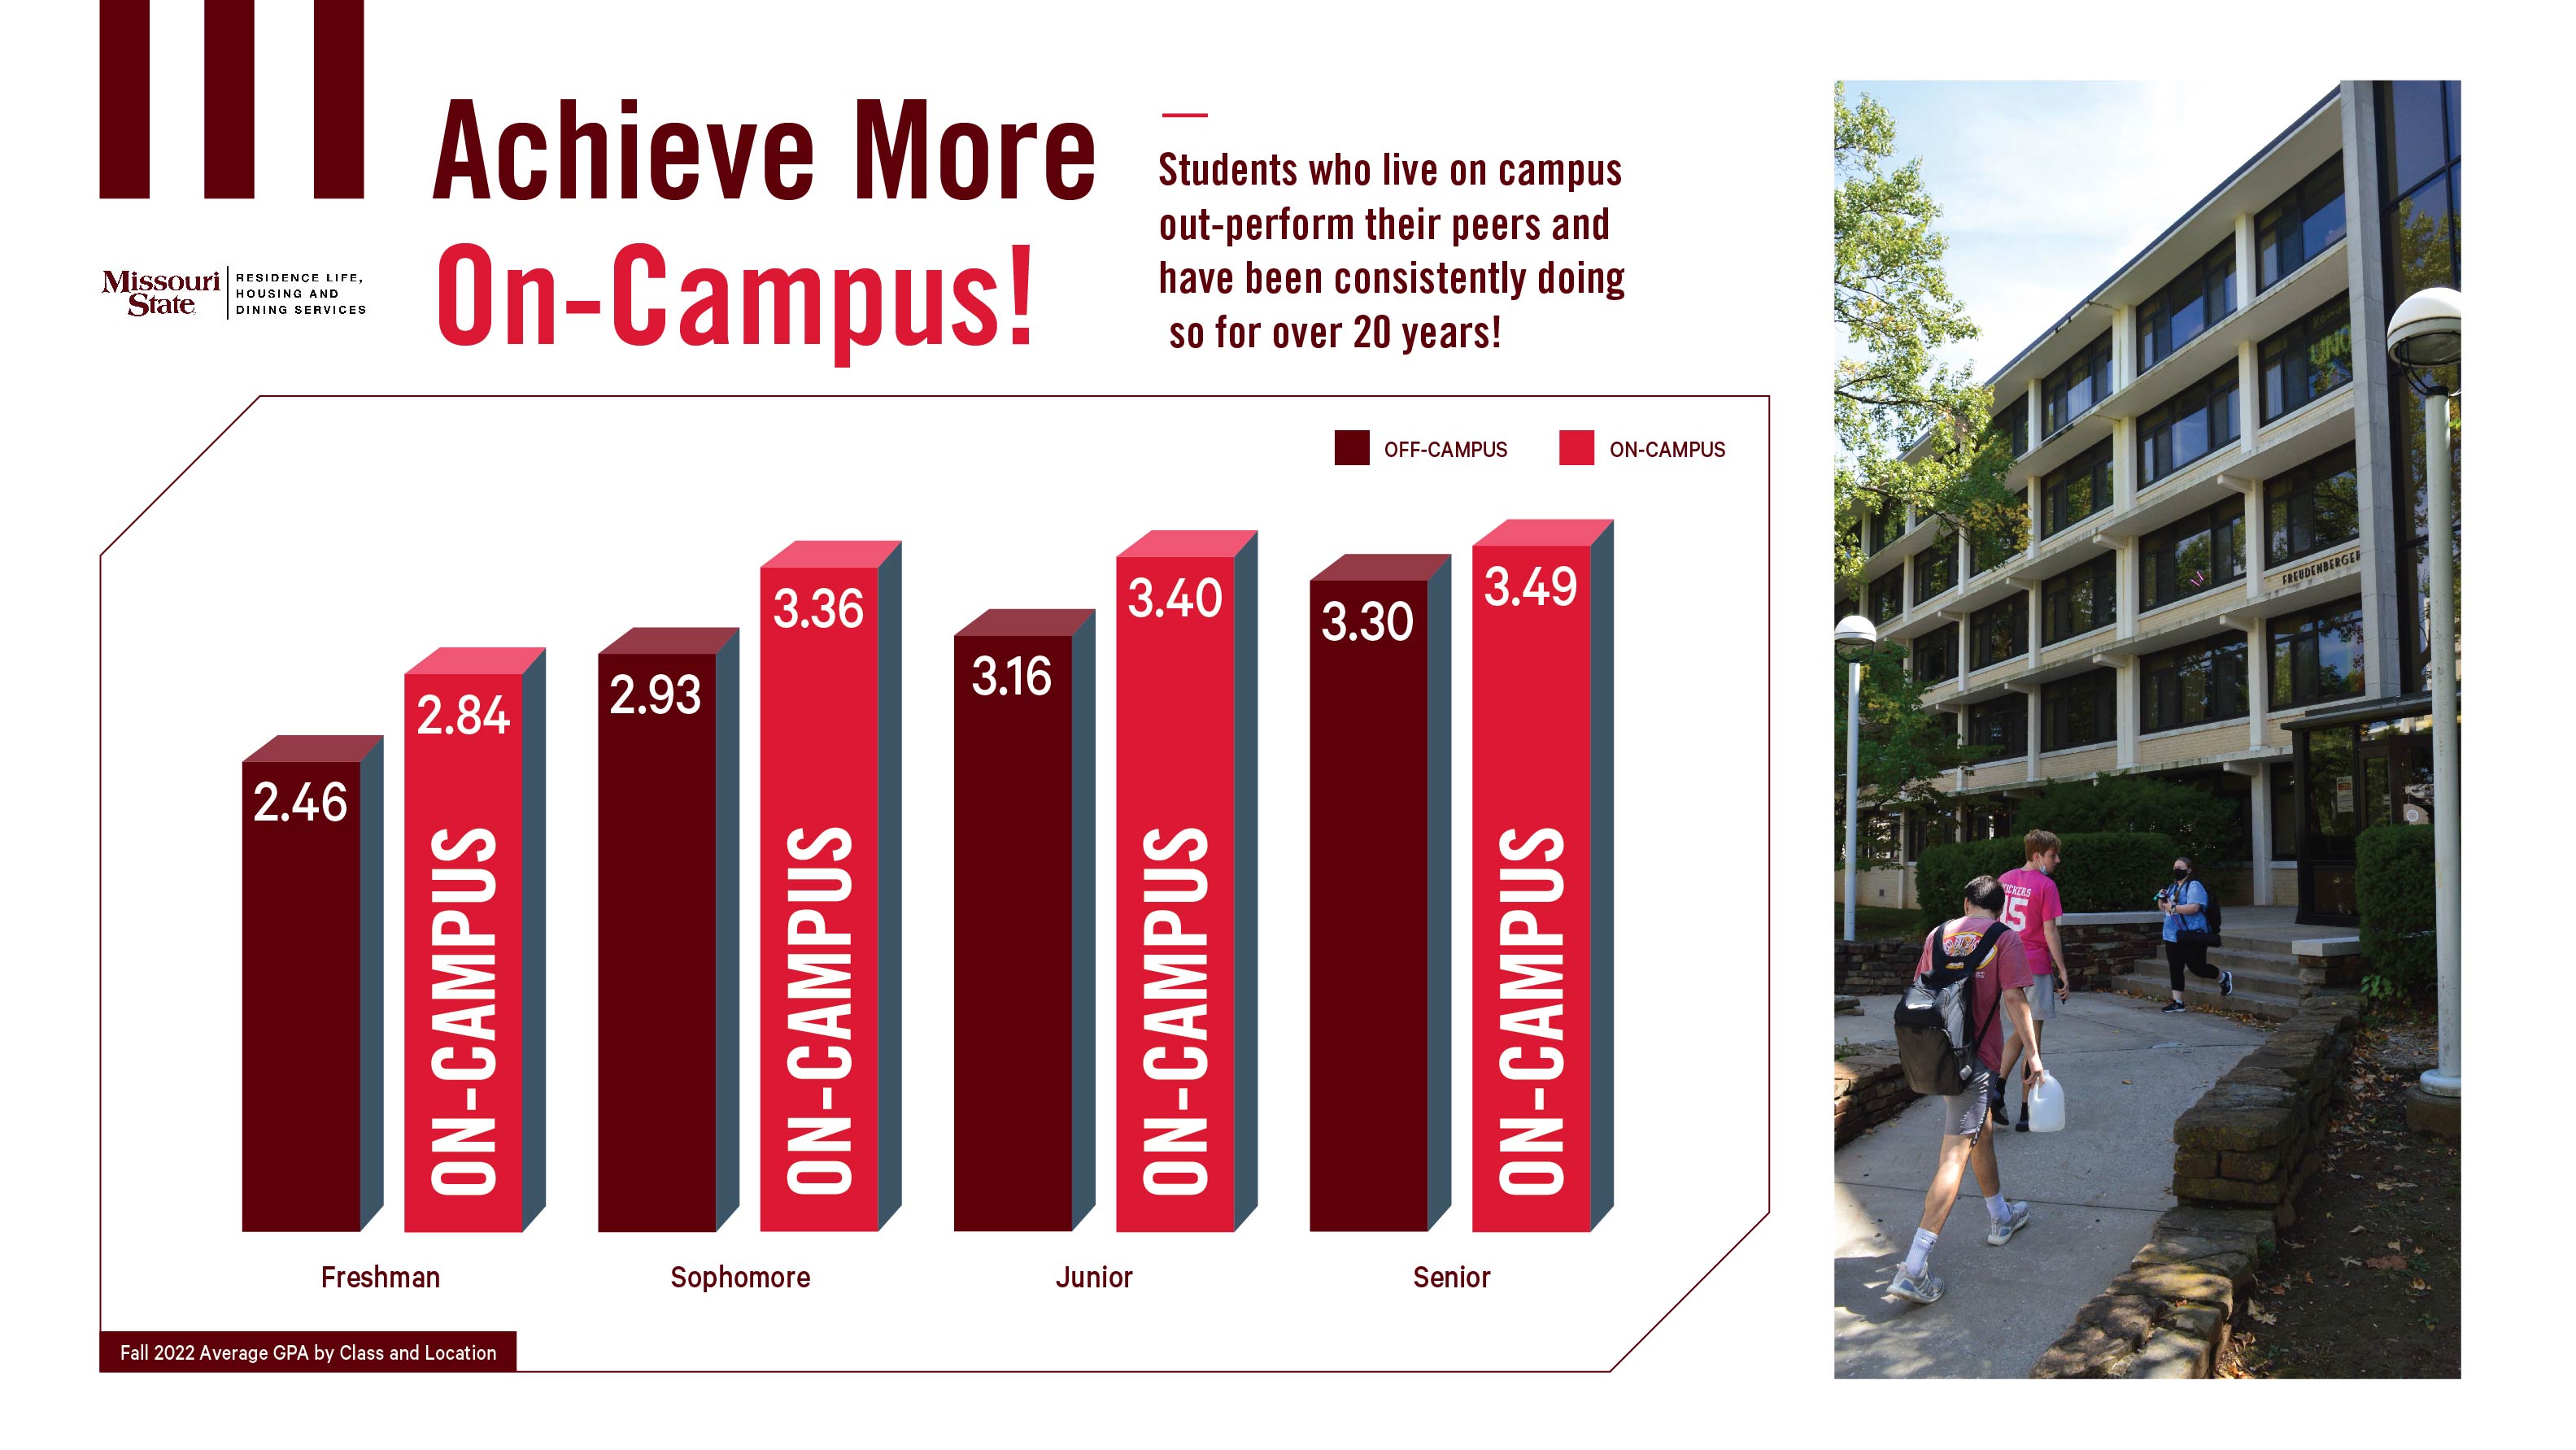 GPA data showing on campus students have higher GPA than off campus students